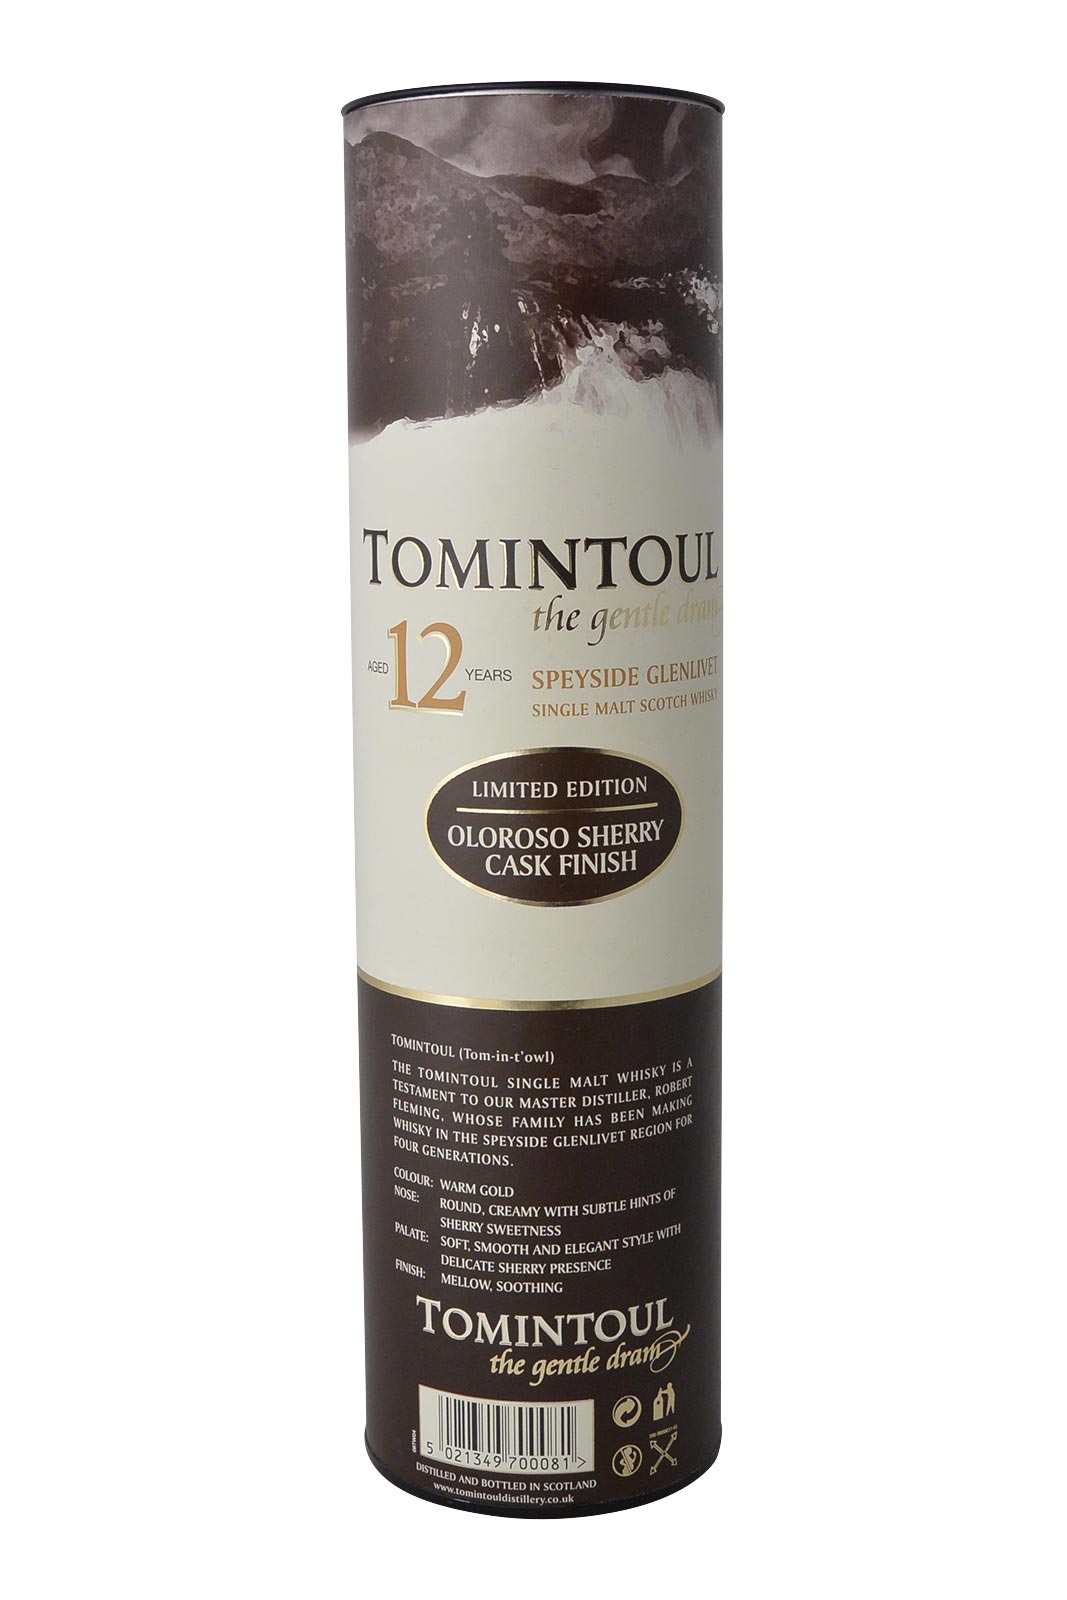 Tomintoul 12 ans Oloroso Sherry Cask